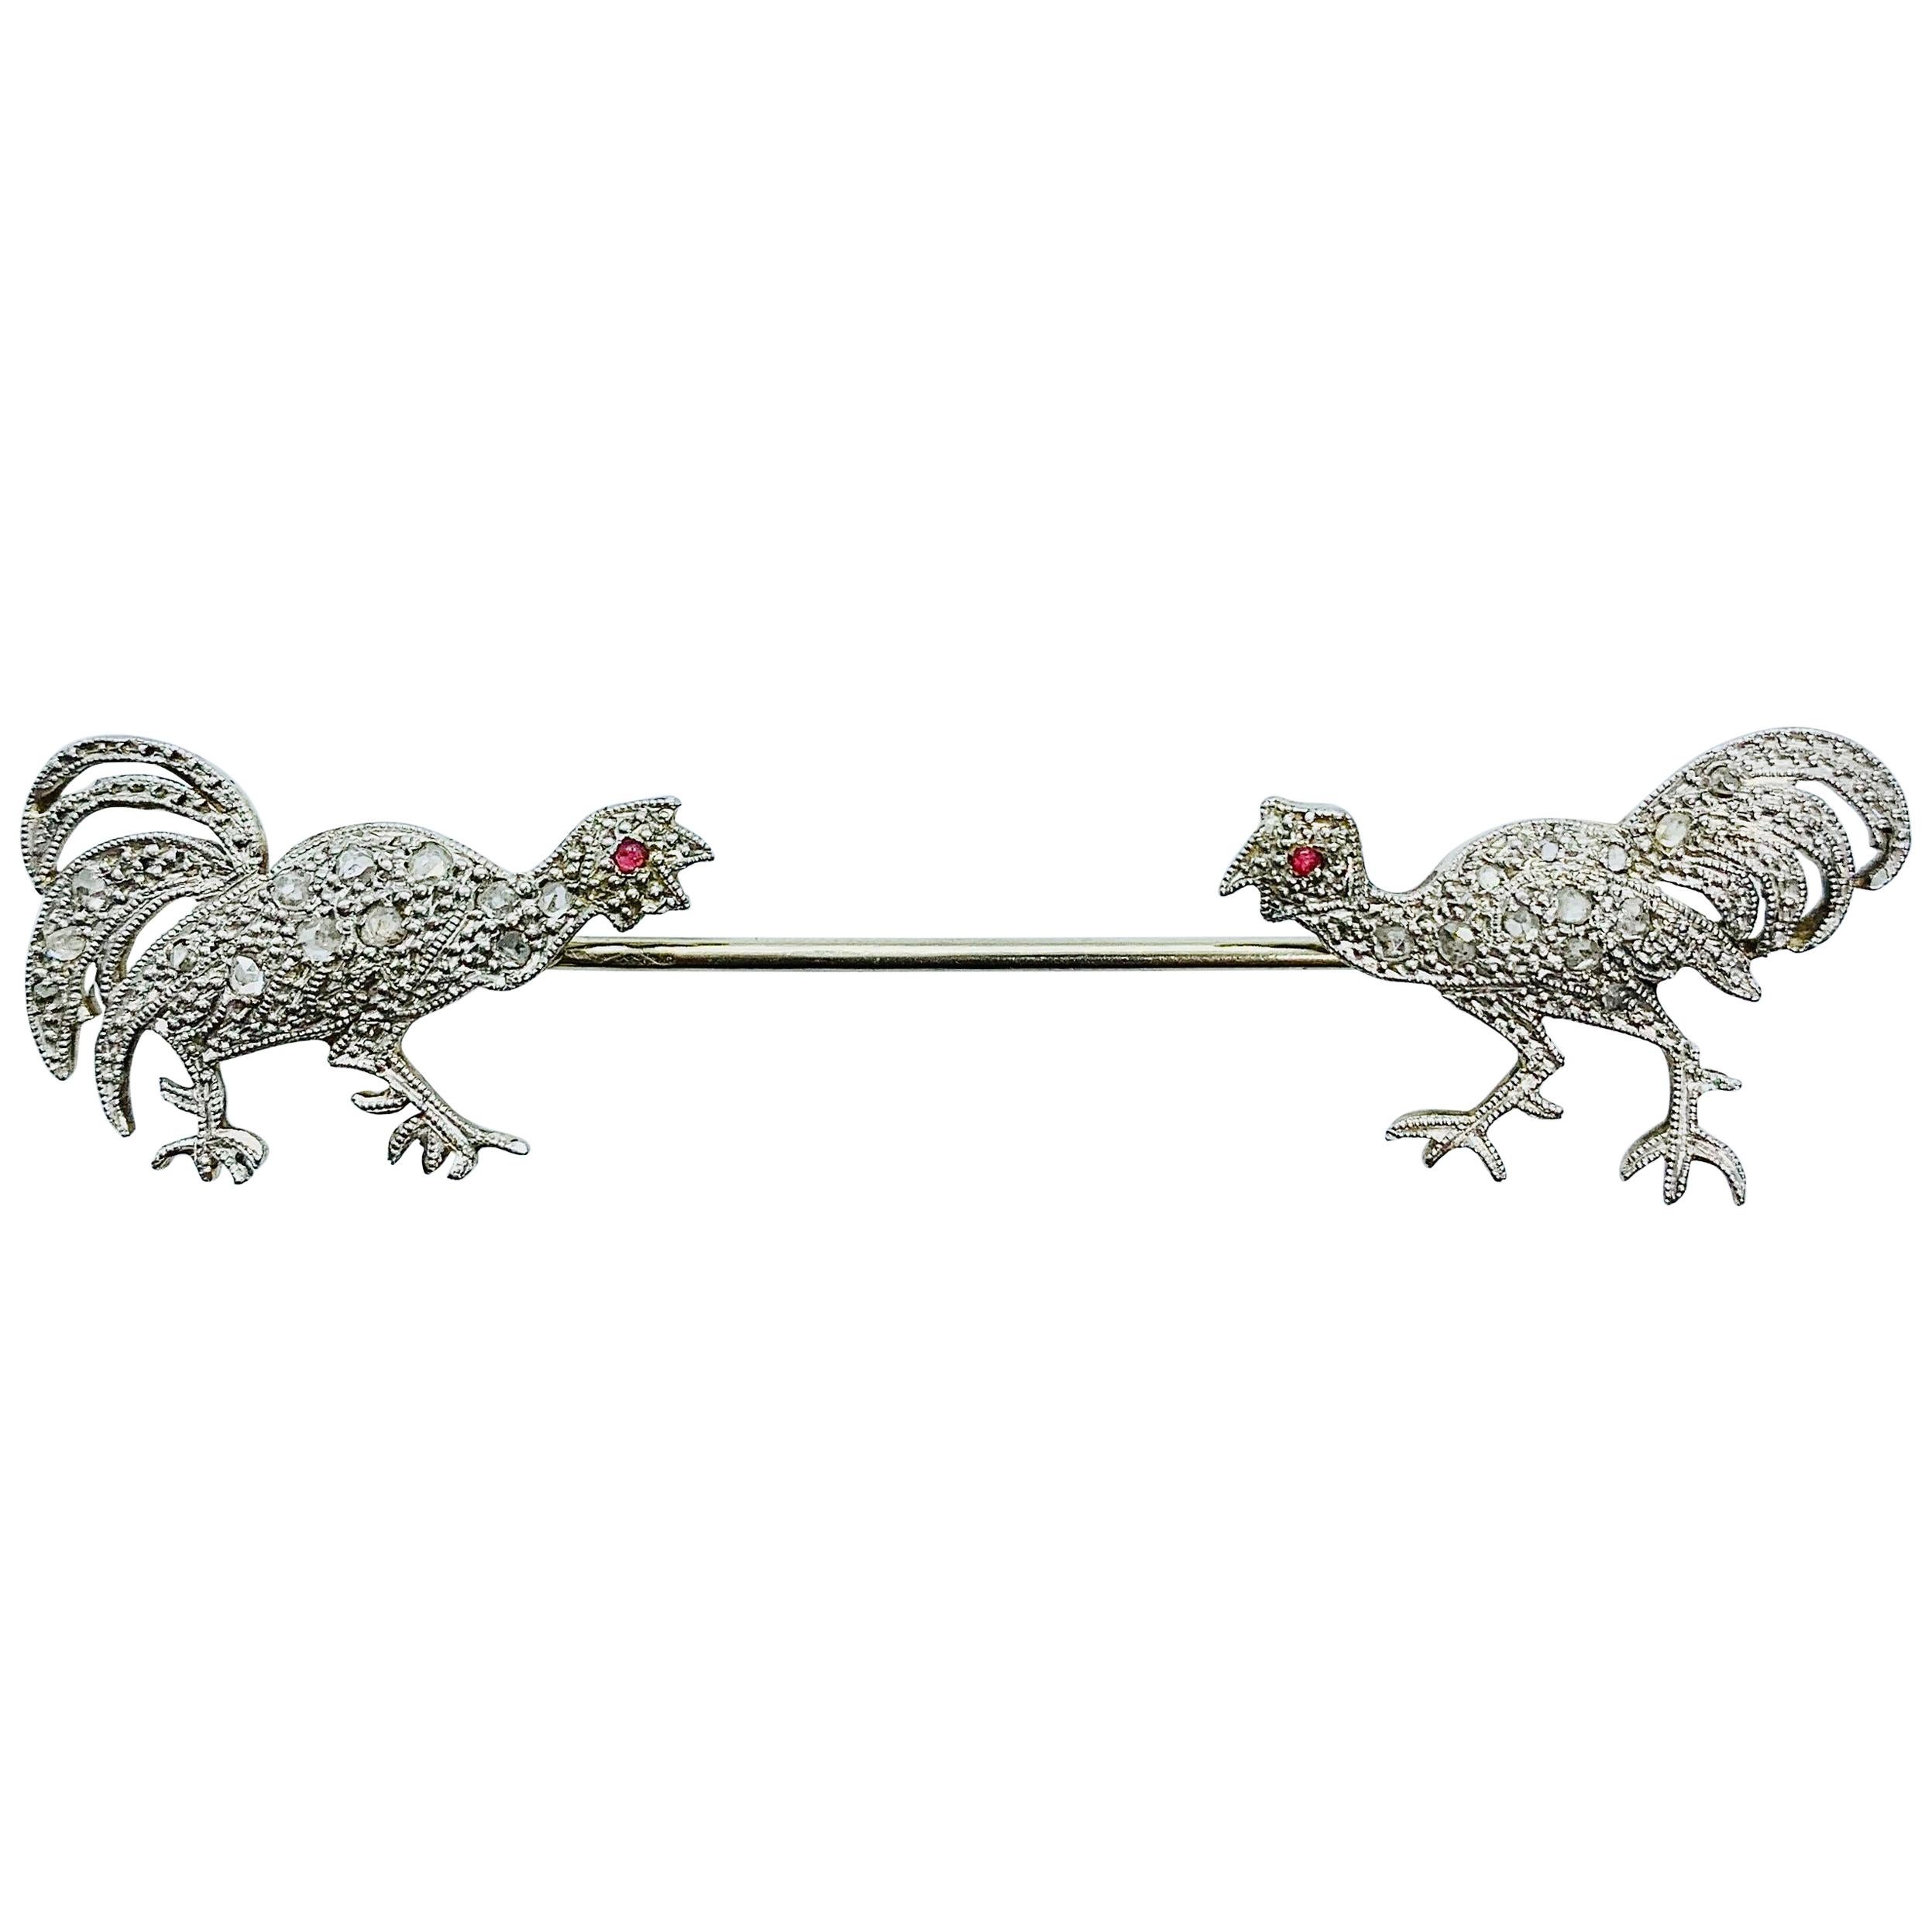 Vintage French 18 Karat White Gold Diamond and Ruby Rooster Jabot Pin For Sale